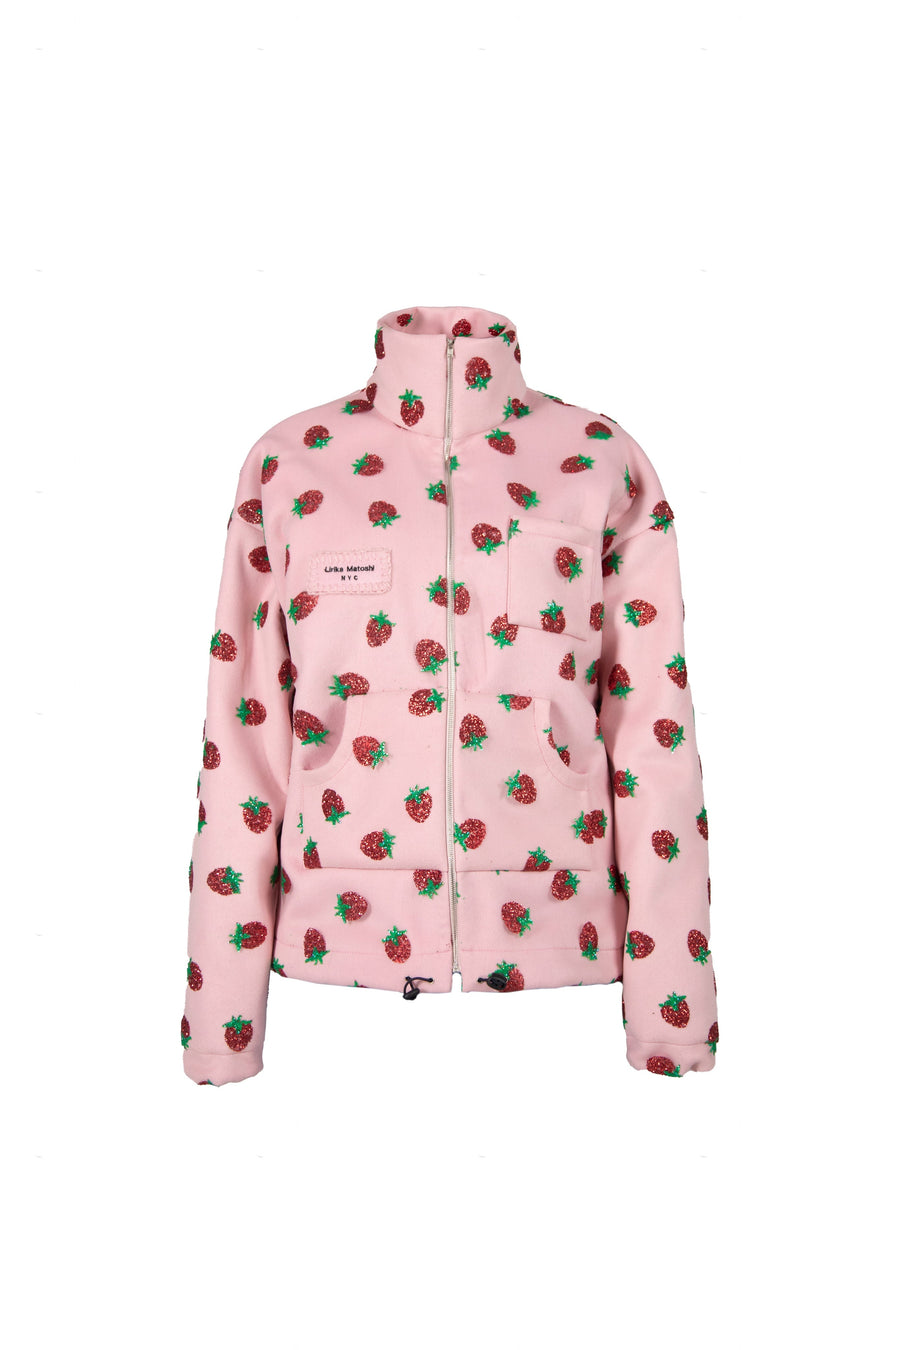 Pink wool jacket with embroidered strawberries